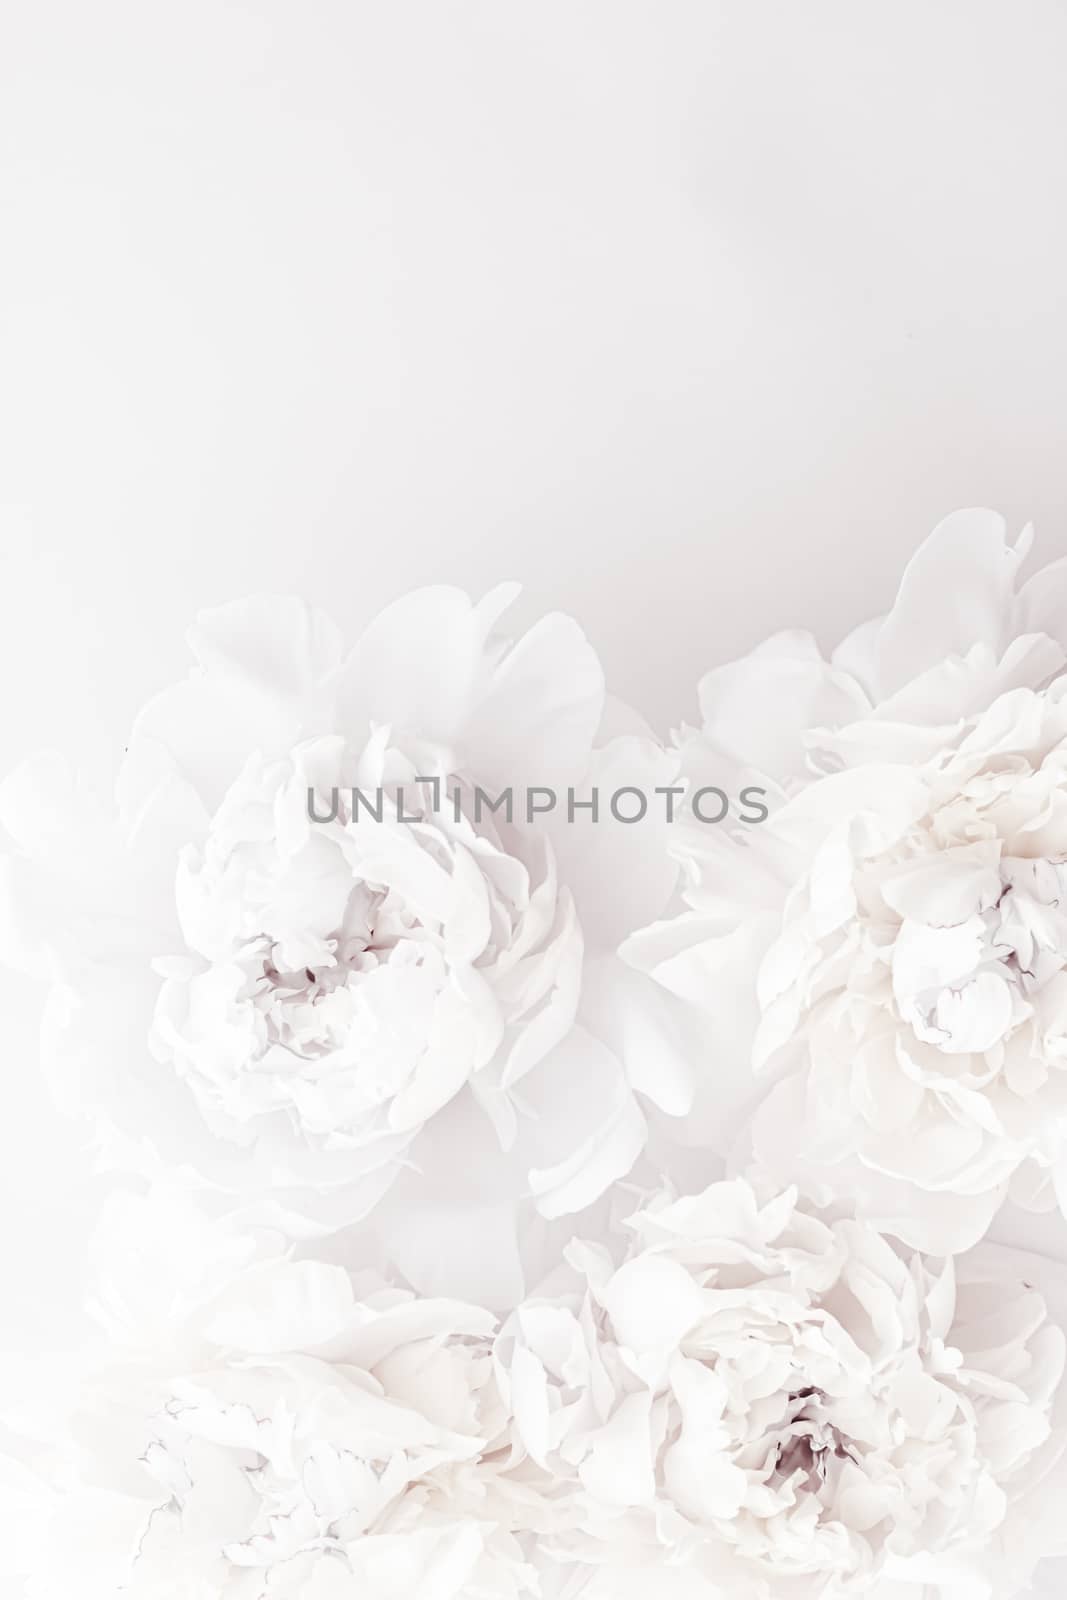 Pure white peony flowers as floral art background, wedding decor and luxury branding design